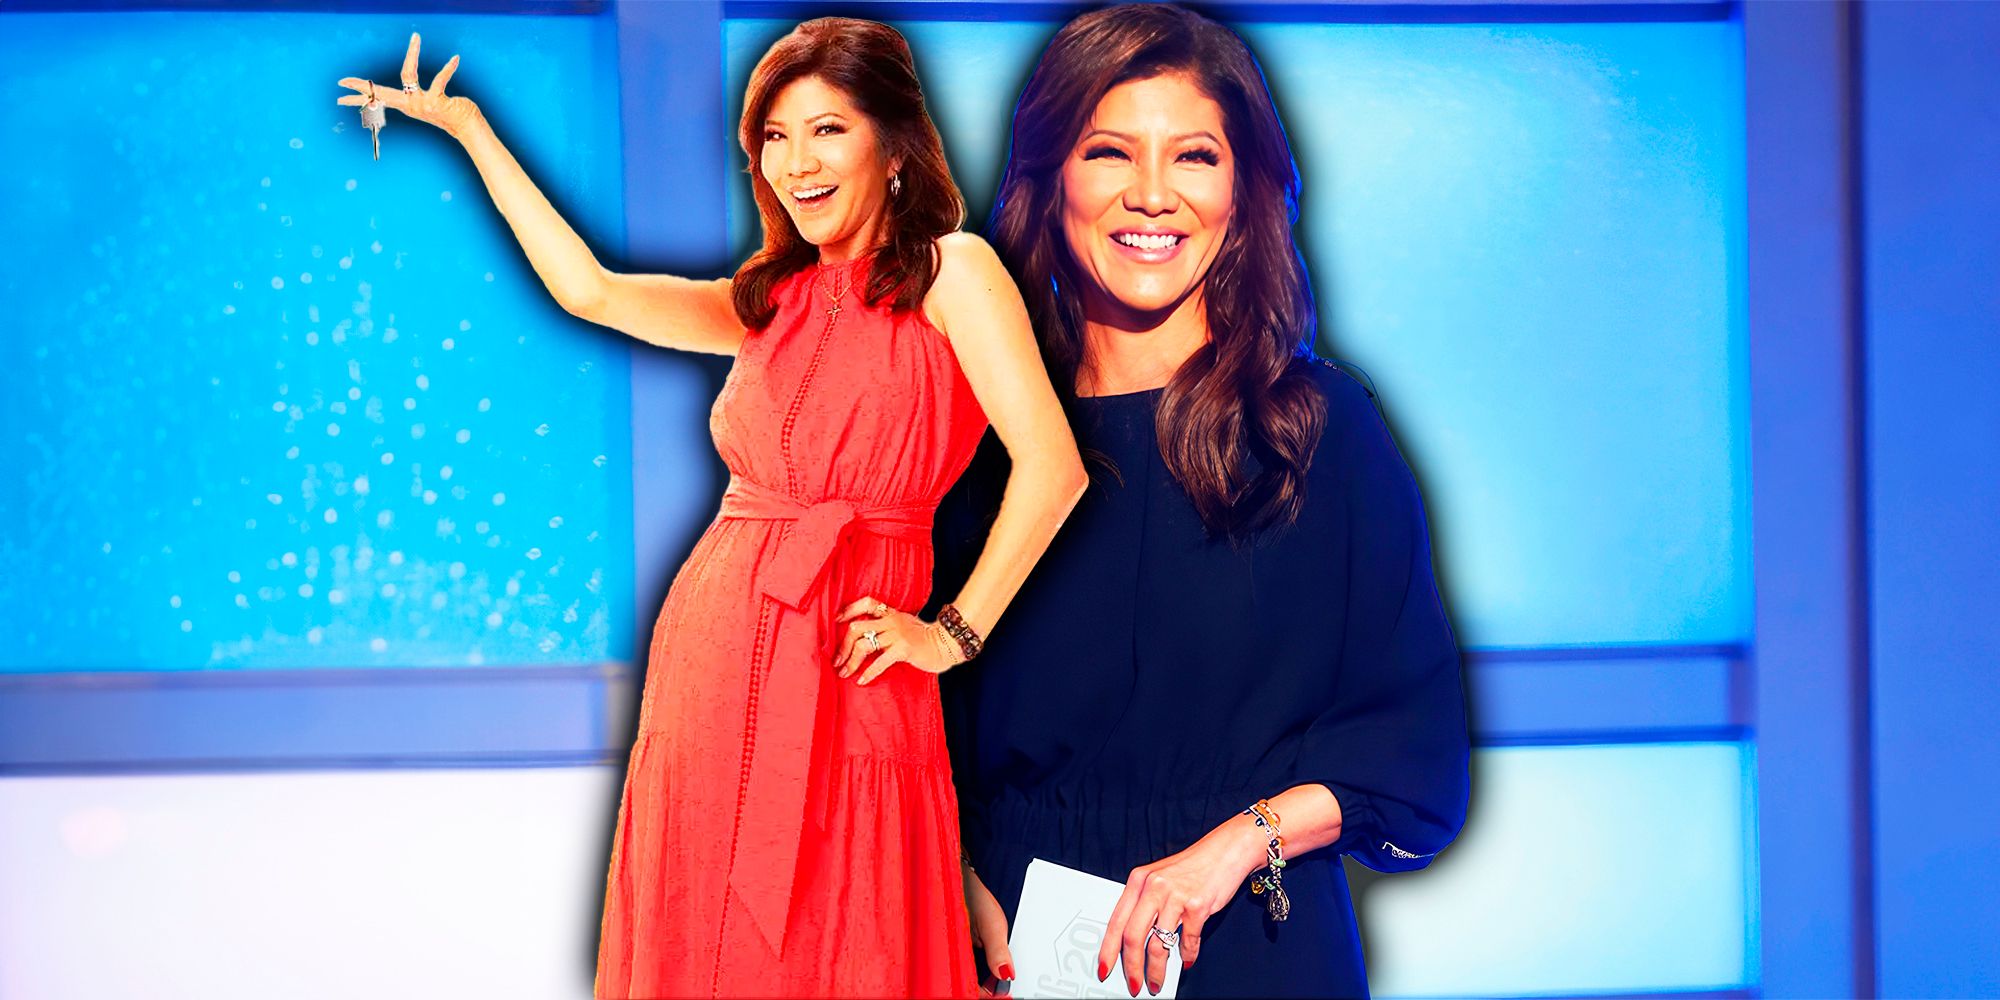 Montage of Julie Chen from Big Brother